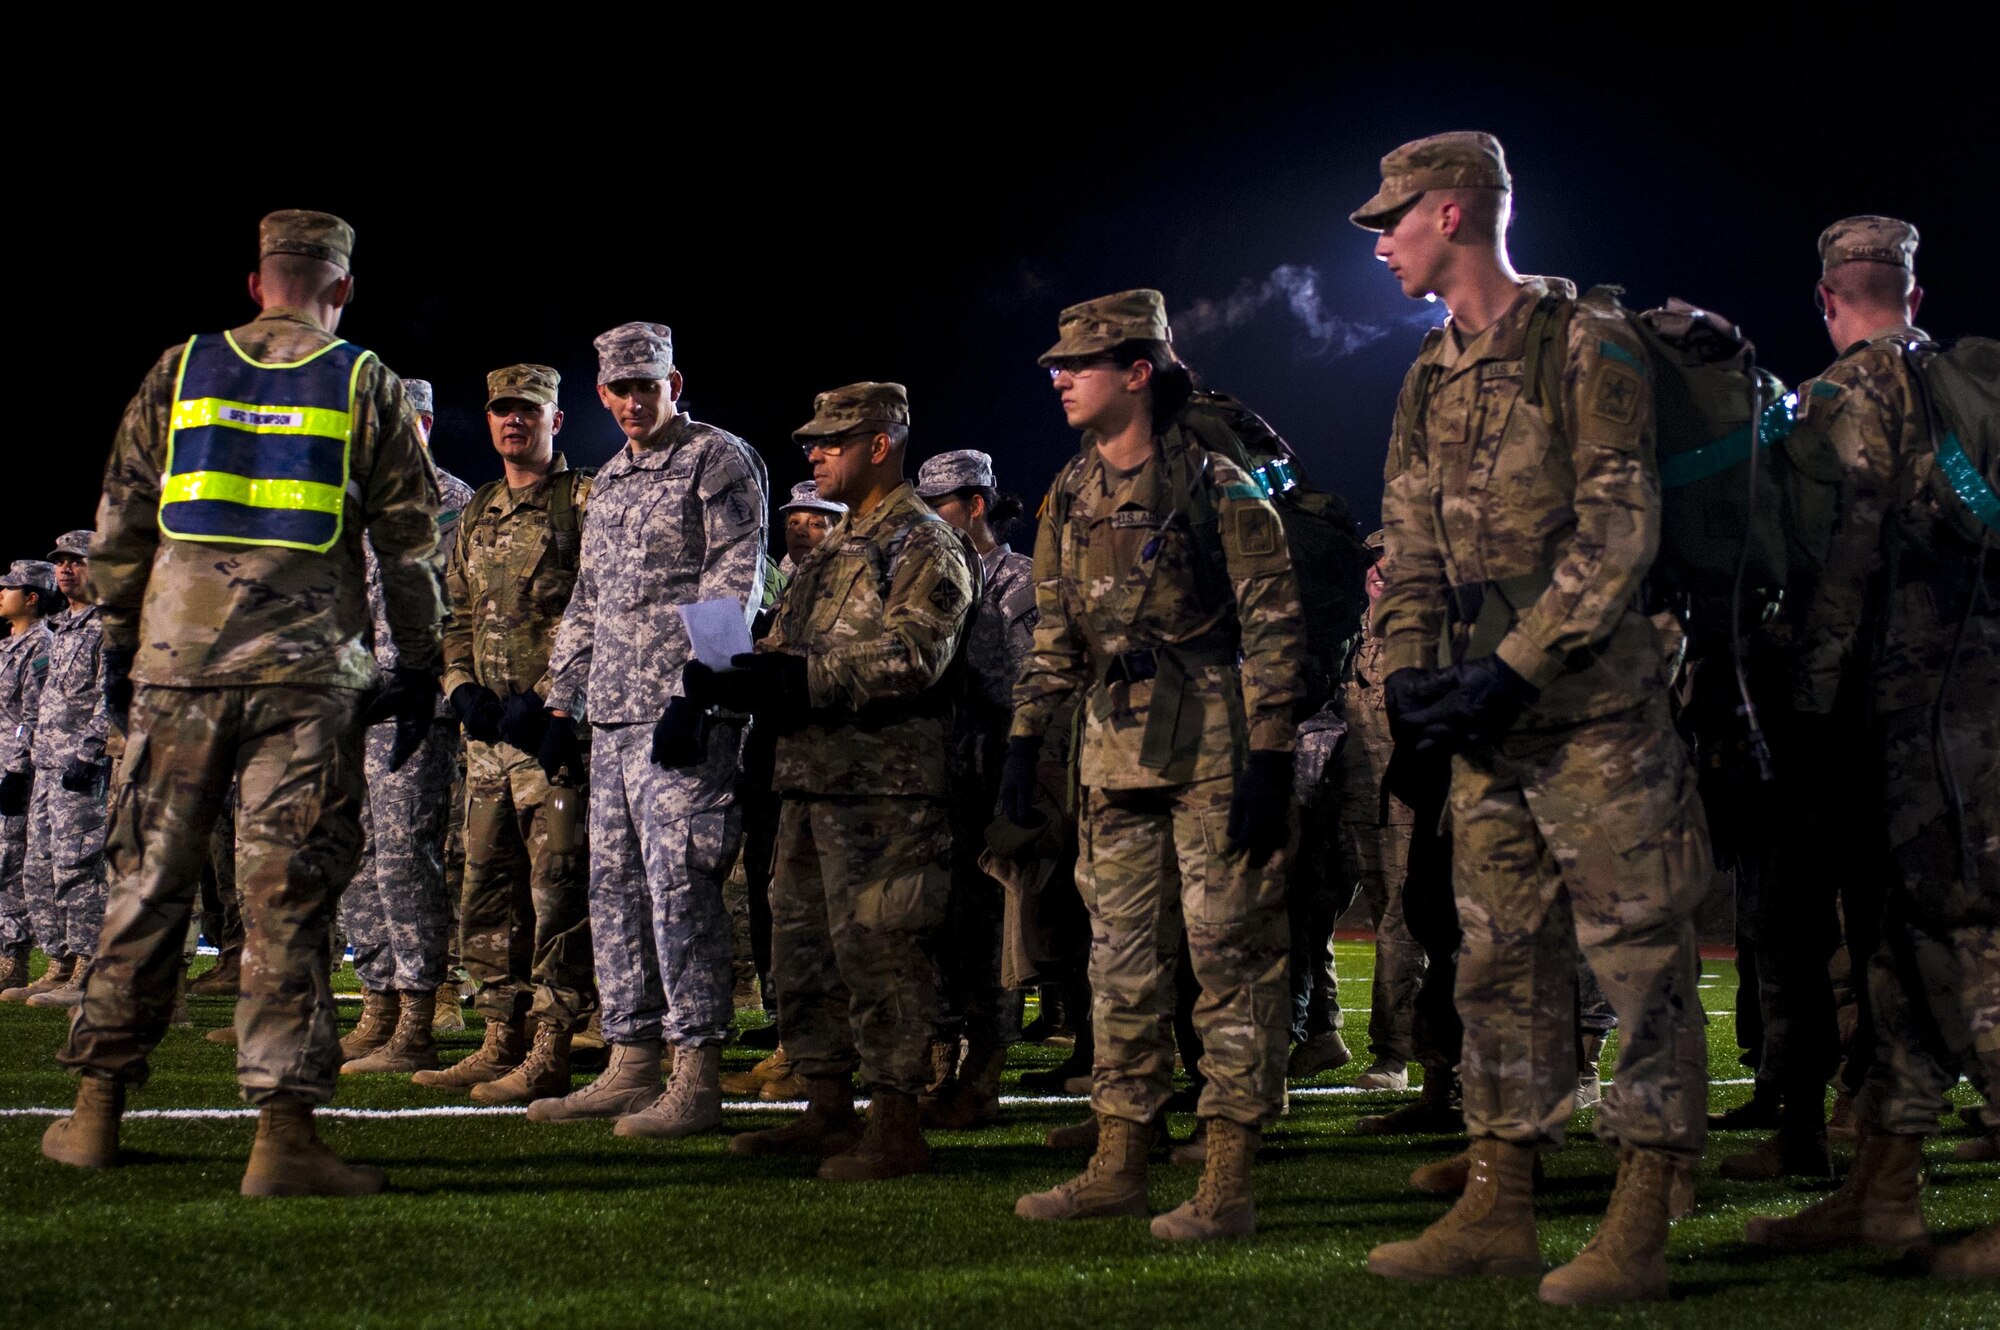 Soldiers of the 344th Military Intelligence Battalion receive a briefing while in formation before the beginning of the Fourth Annual Spartan Race at the Mathis Fitness Center football field on Goodfellow Air Force Base, Texas, February 3, 2017. The Spartan Race is a circuit, containing a 1.8-mile ruck march, a log carry around the track for 1 mile, body carries, 100 pullups, and a Humvee drag. (U.S. Air Force photo by Senior Airman Scott Jackson/Released)